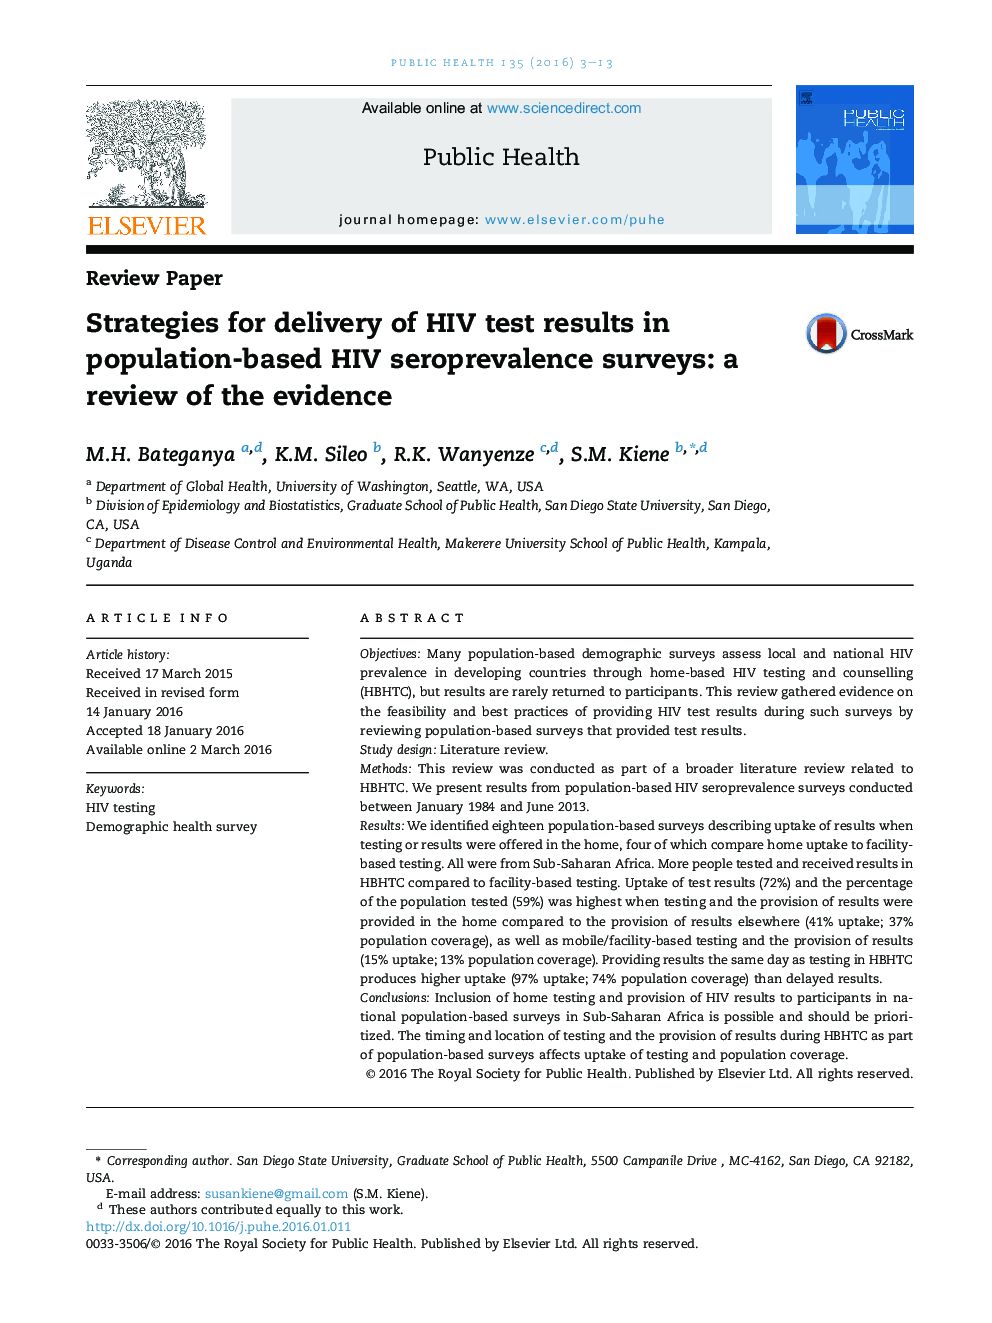 Strategies for delivery of HIV test results in population-based HIV seroprevalence surveys: a review of the evidence